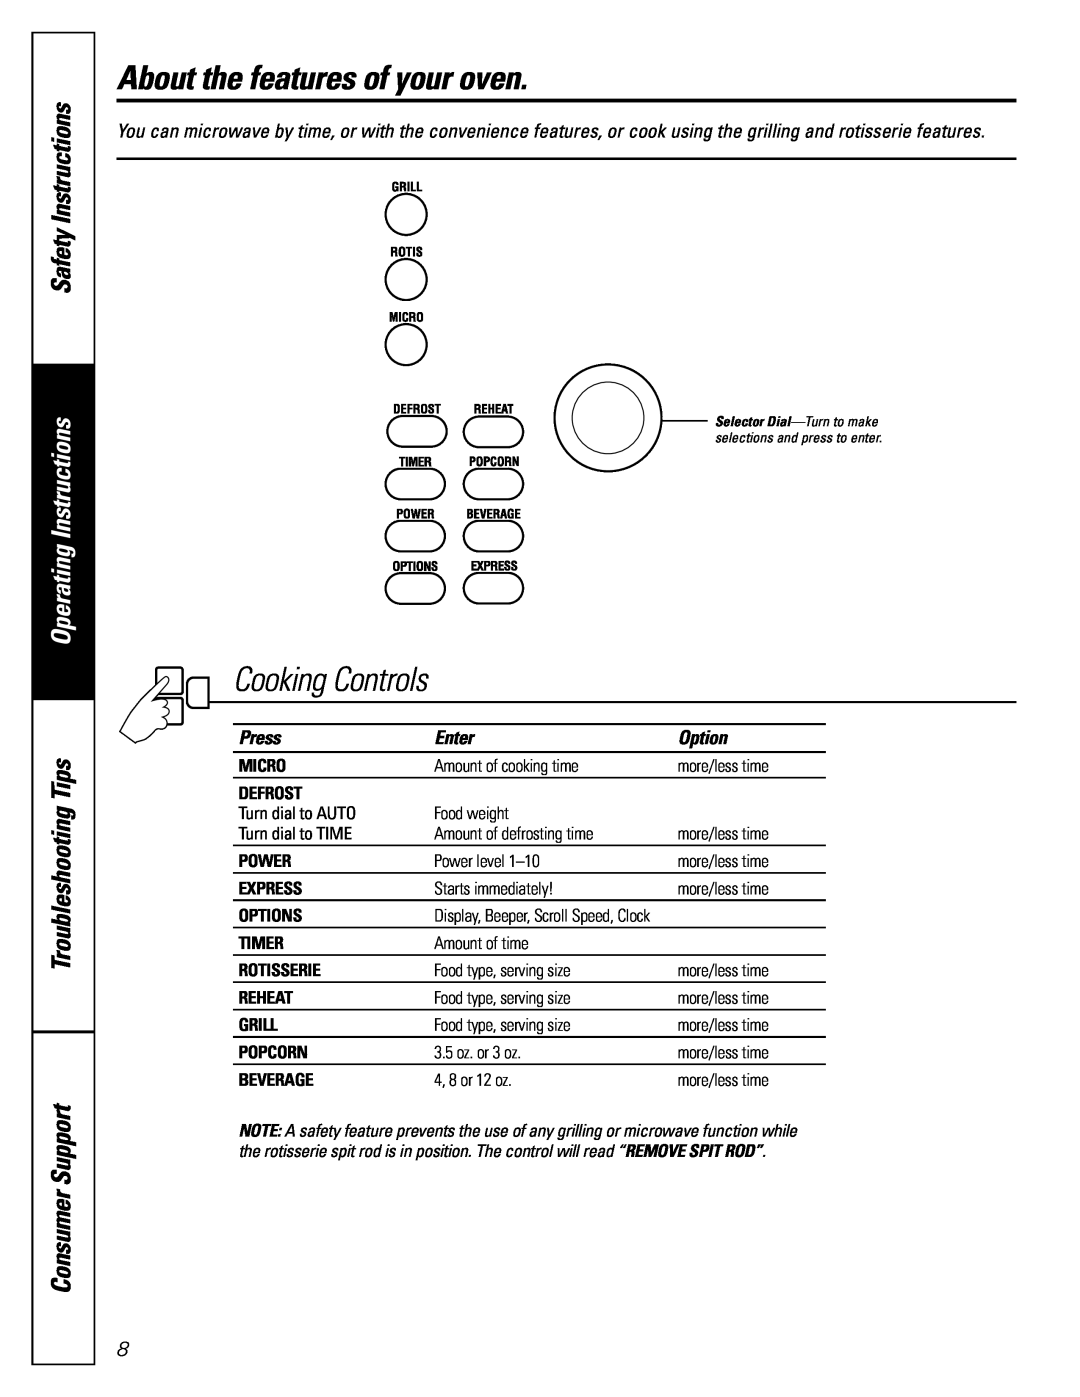 GE JES1289 Cooking Controls, About the features of your oven, Safety Instructions, Operating Instructions, Press, Enter 